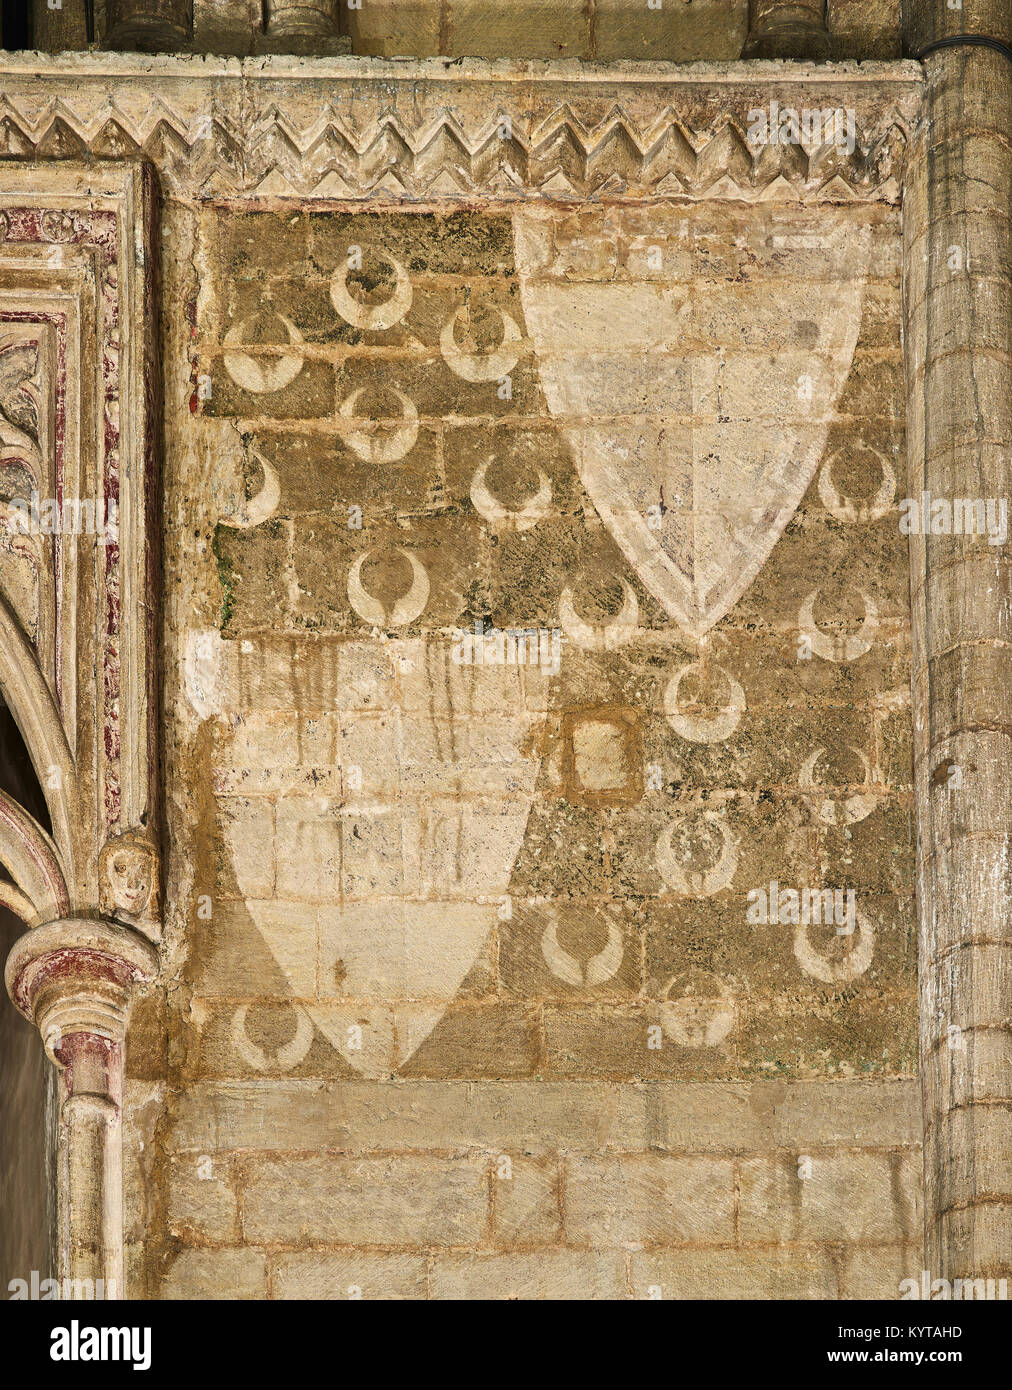 Peterborough Cathedral. Remains of wall-paintings in the apse showing shields and crescent moons. Stock Photo